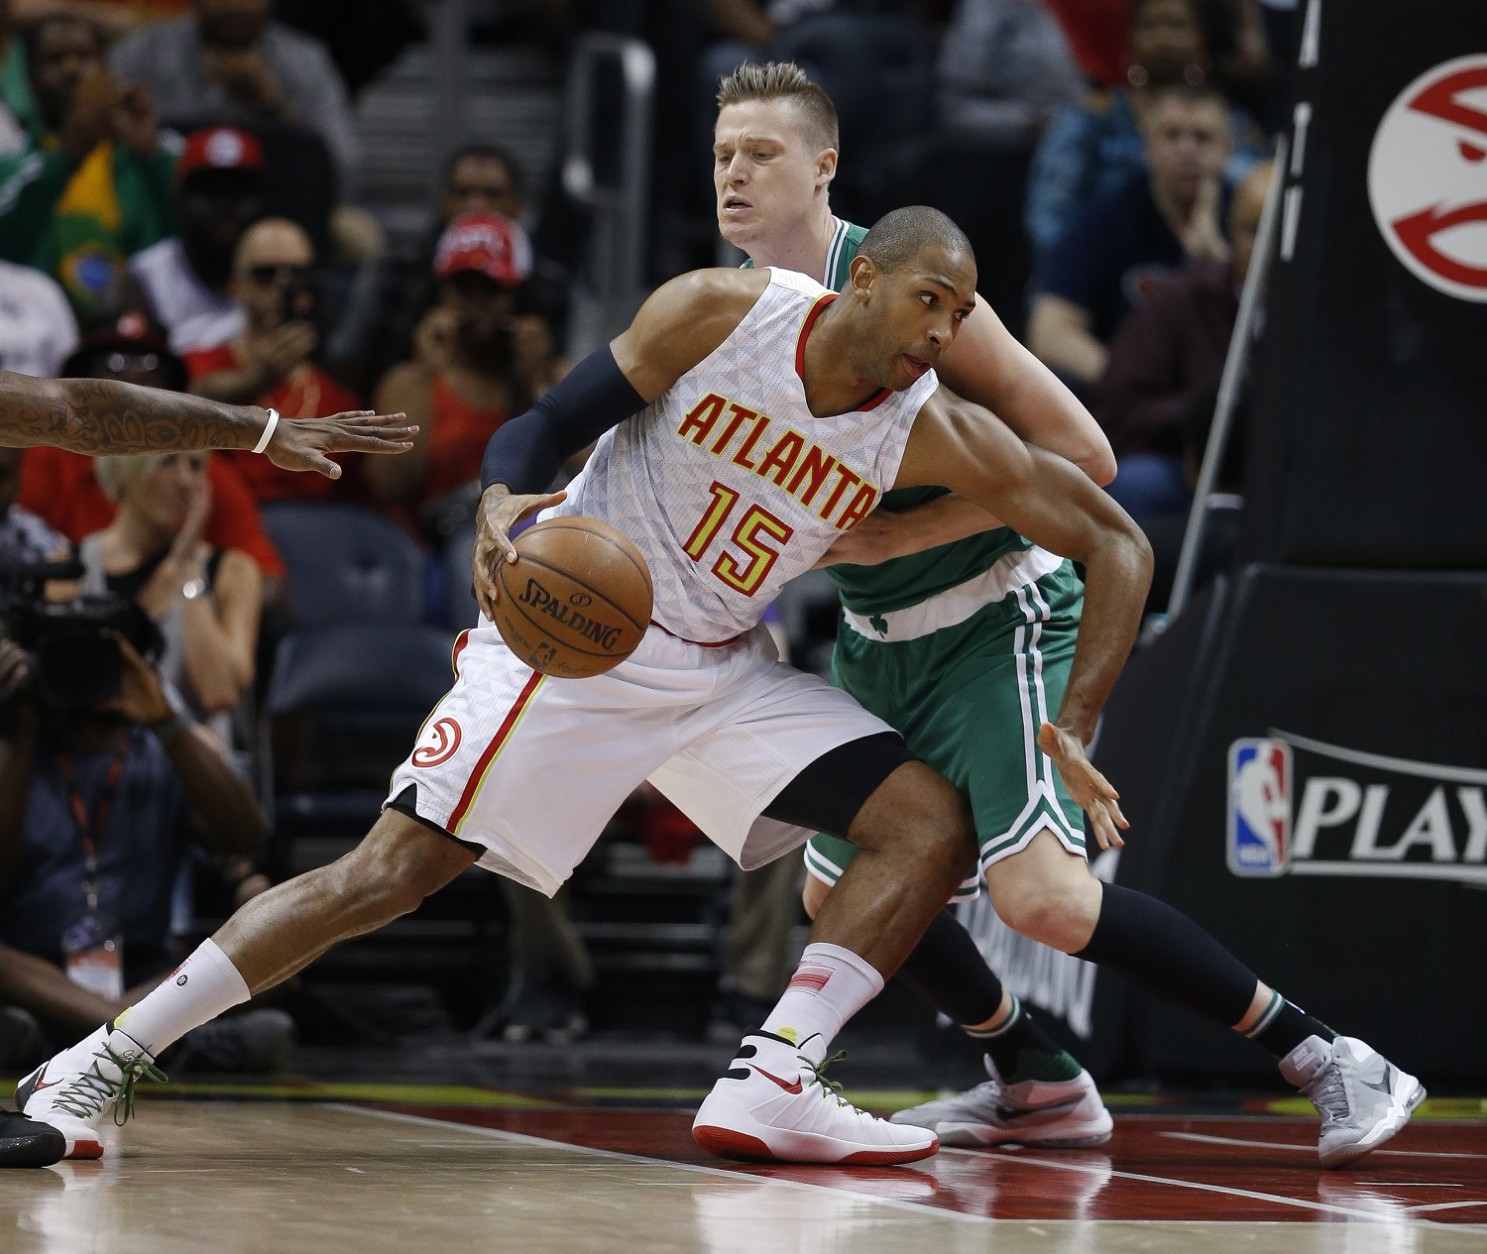 FILE - In this April 26, 2016, file photo, Atlanta Hawks center Al Horford (15) drives against Boston Celtics forward Jonas Jerebko during the first half of Game 5 of an NBA basketball first-round playoff series in Atlanta. (Toronto's DeMar DeRozan, Atlanta's Al Horford, Memphis point guard Mike Conley and Houston's Dwight Howard are among those who figure to become free agents this summer when the NBA's new television deal will kick in. (AP Photo/John Bazemore, File)